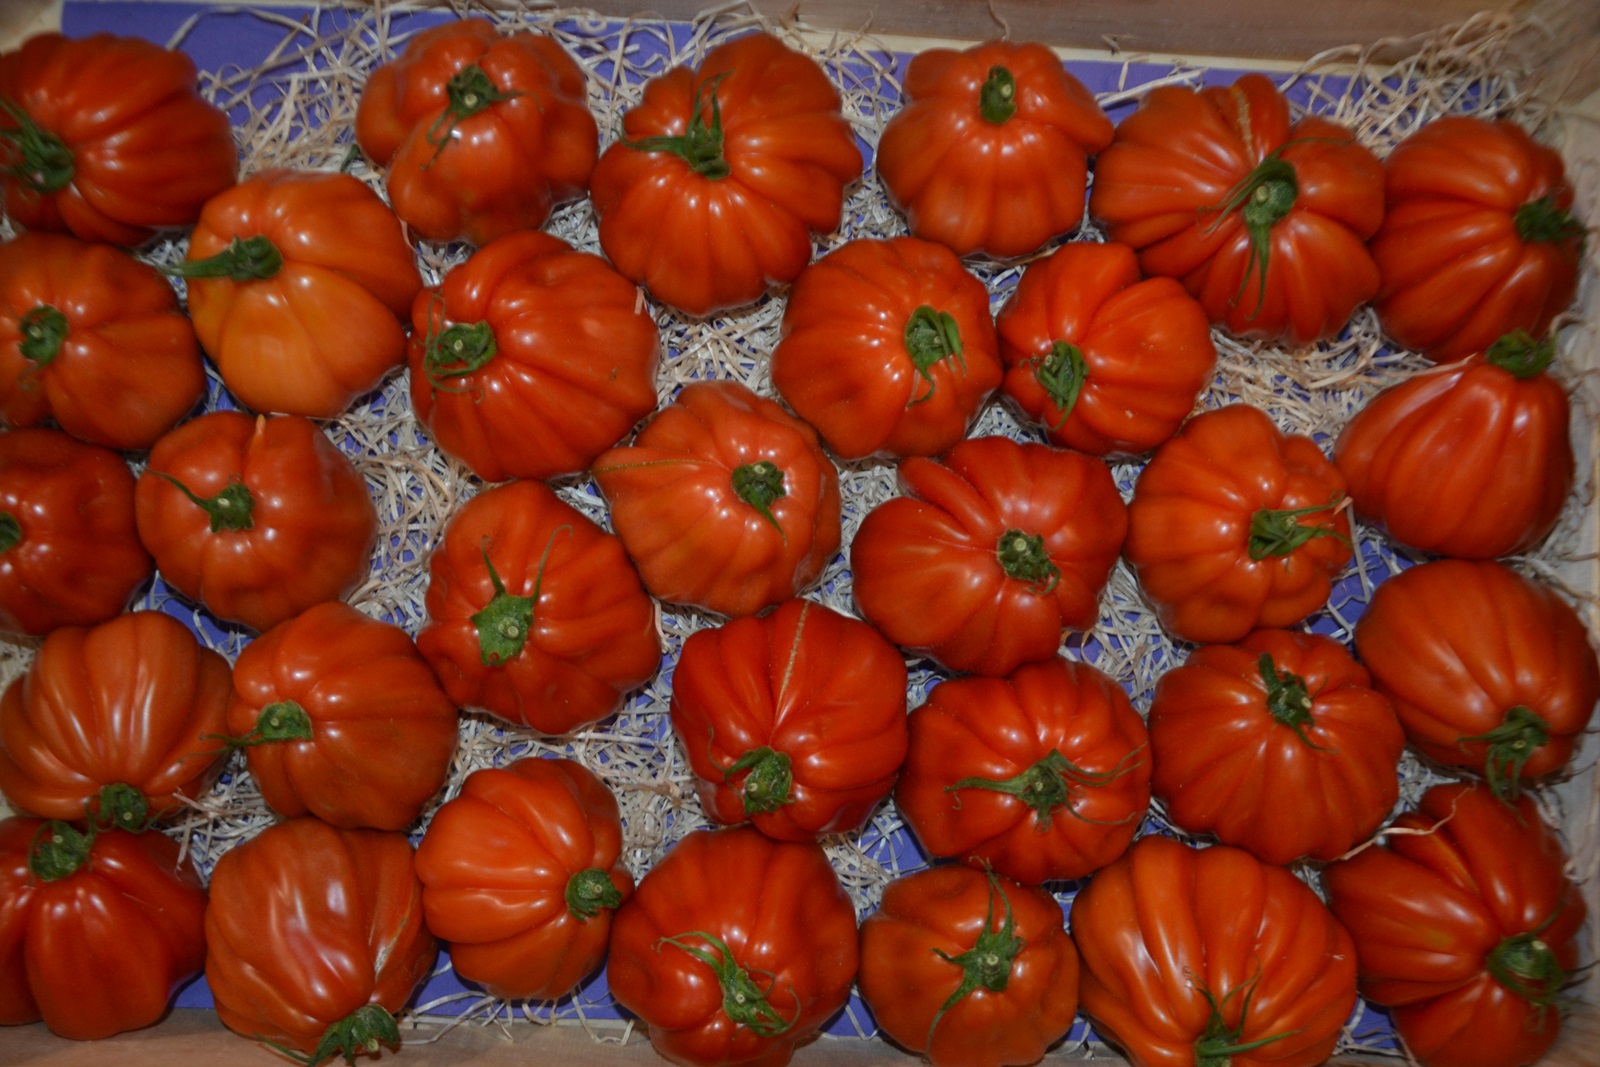 Tomatoes: Morocco reinforces its market share in EU